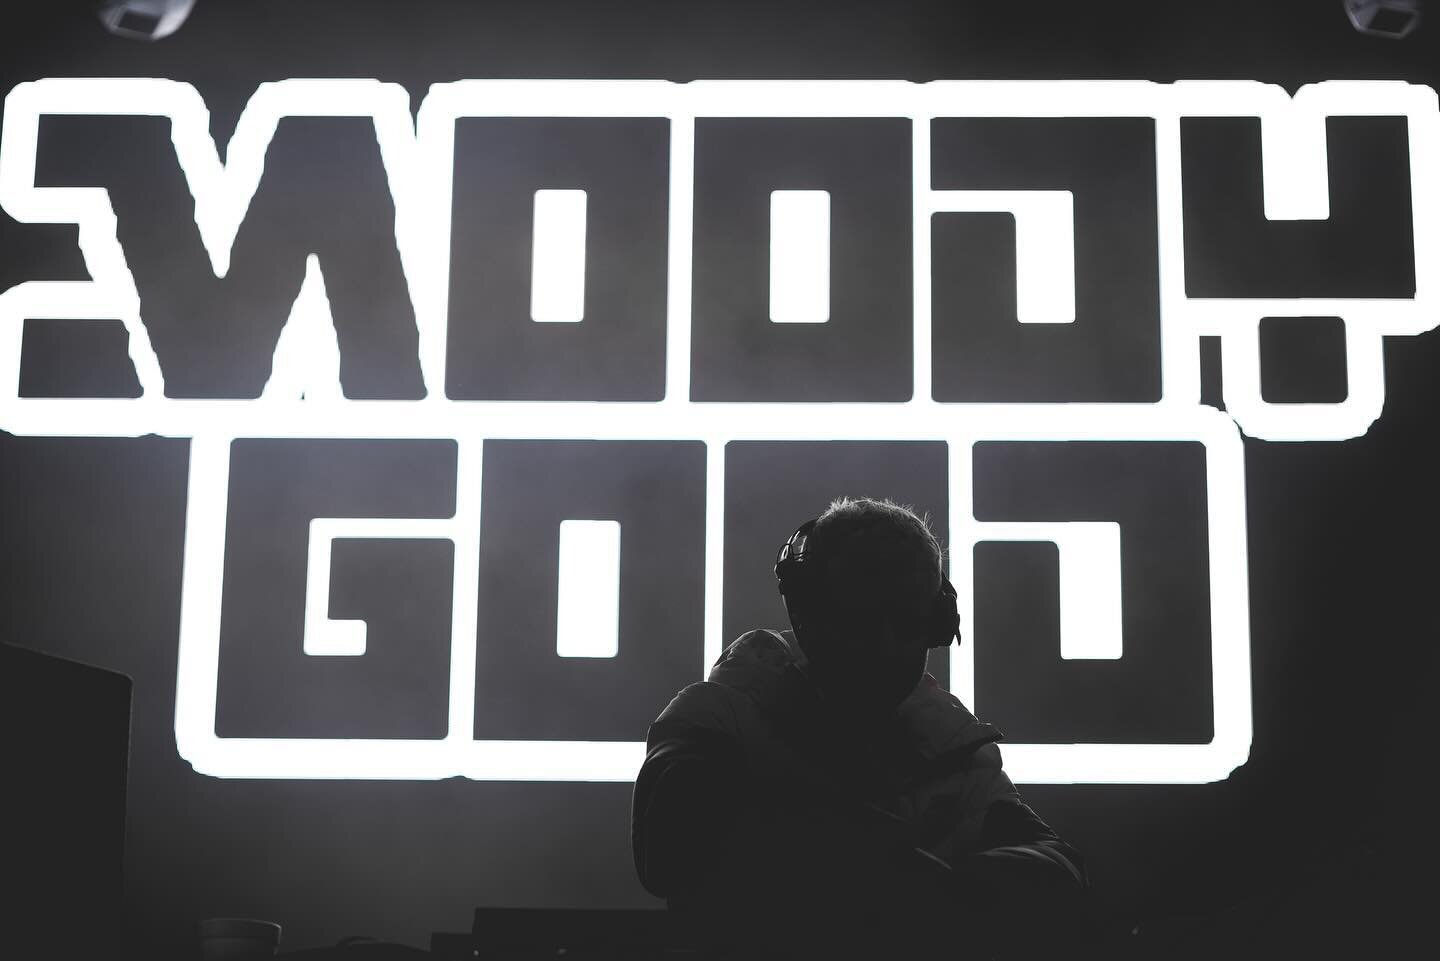 Don&rsquo;t miss @wtfischee and @moodygood tomorrow if you&rsquo;re in DC at @flashclubdc Main room 🔊

👀 We also have them as support for our G Jones show at Avante Garnder in NYC

Tickets are available at closedsessions.live for both
//
We&rsquo;l